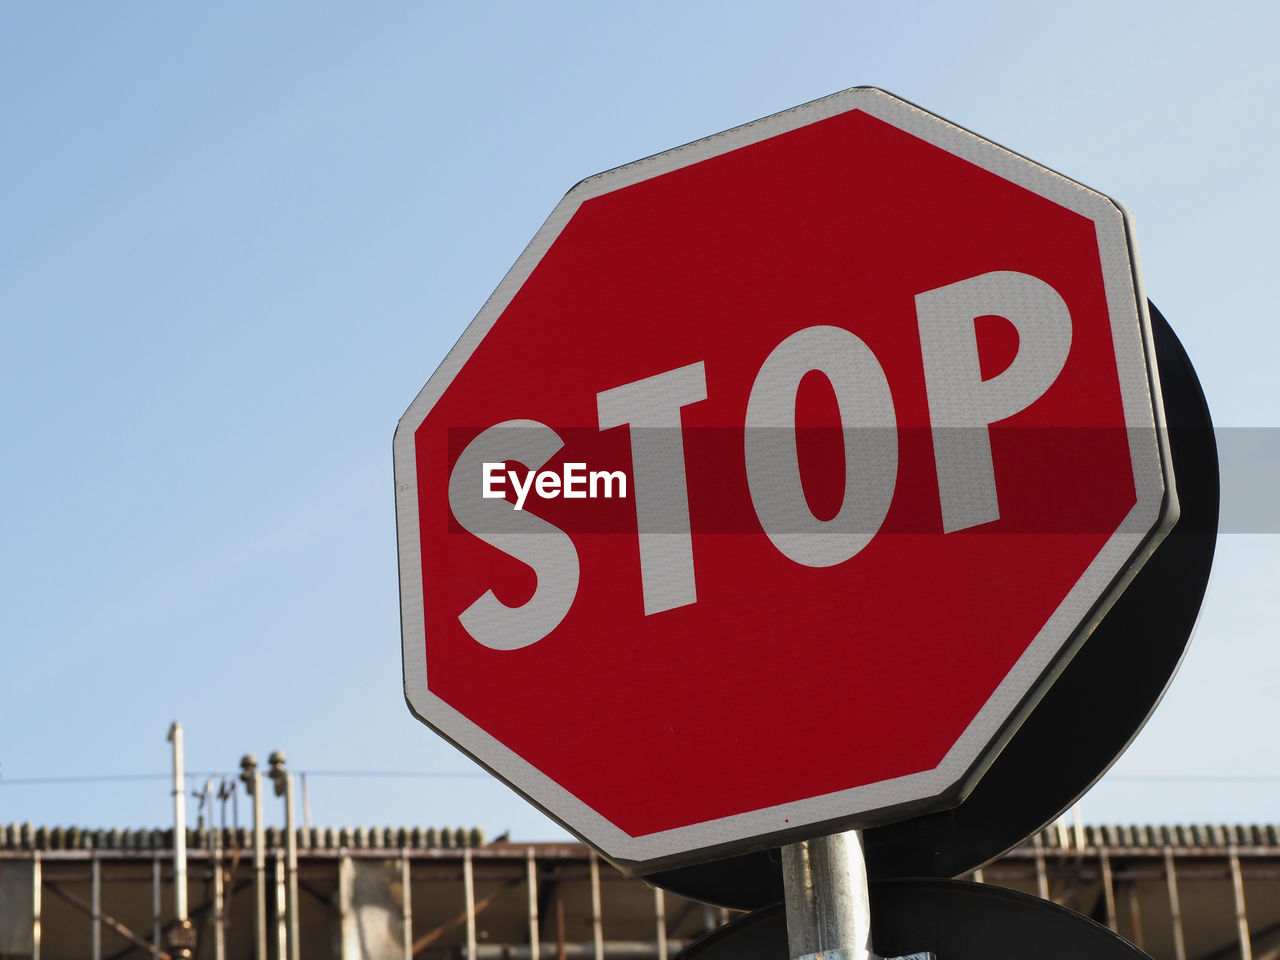 stop sign, road sign, sign, communication, road, red, signage, sky, traffic sign, text, transportation, western script, warning sign, guidance, nature, advertising, stop - single word, clear sky, no people, day, outdoors, information sign, street sign, city